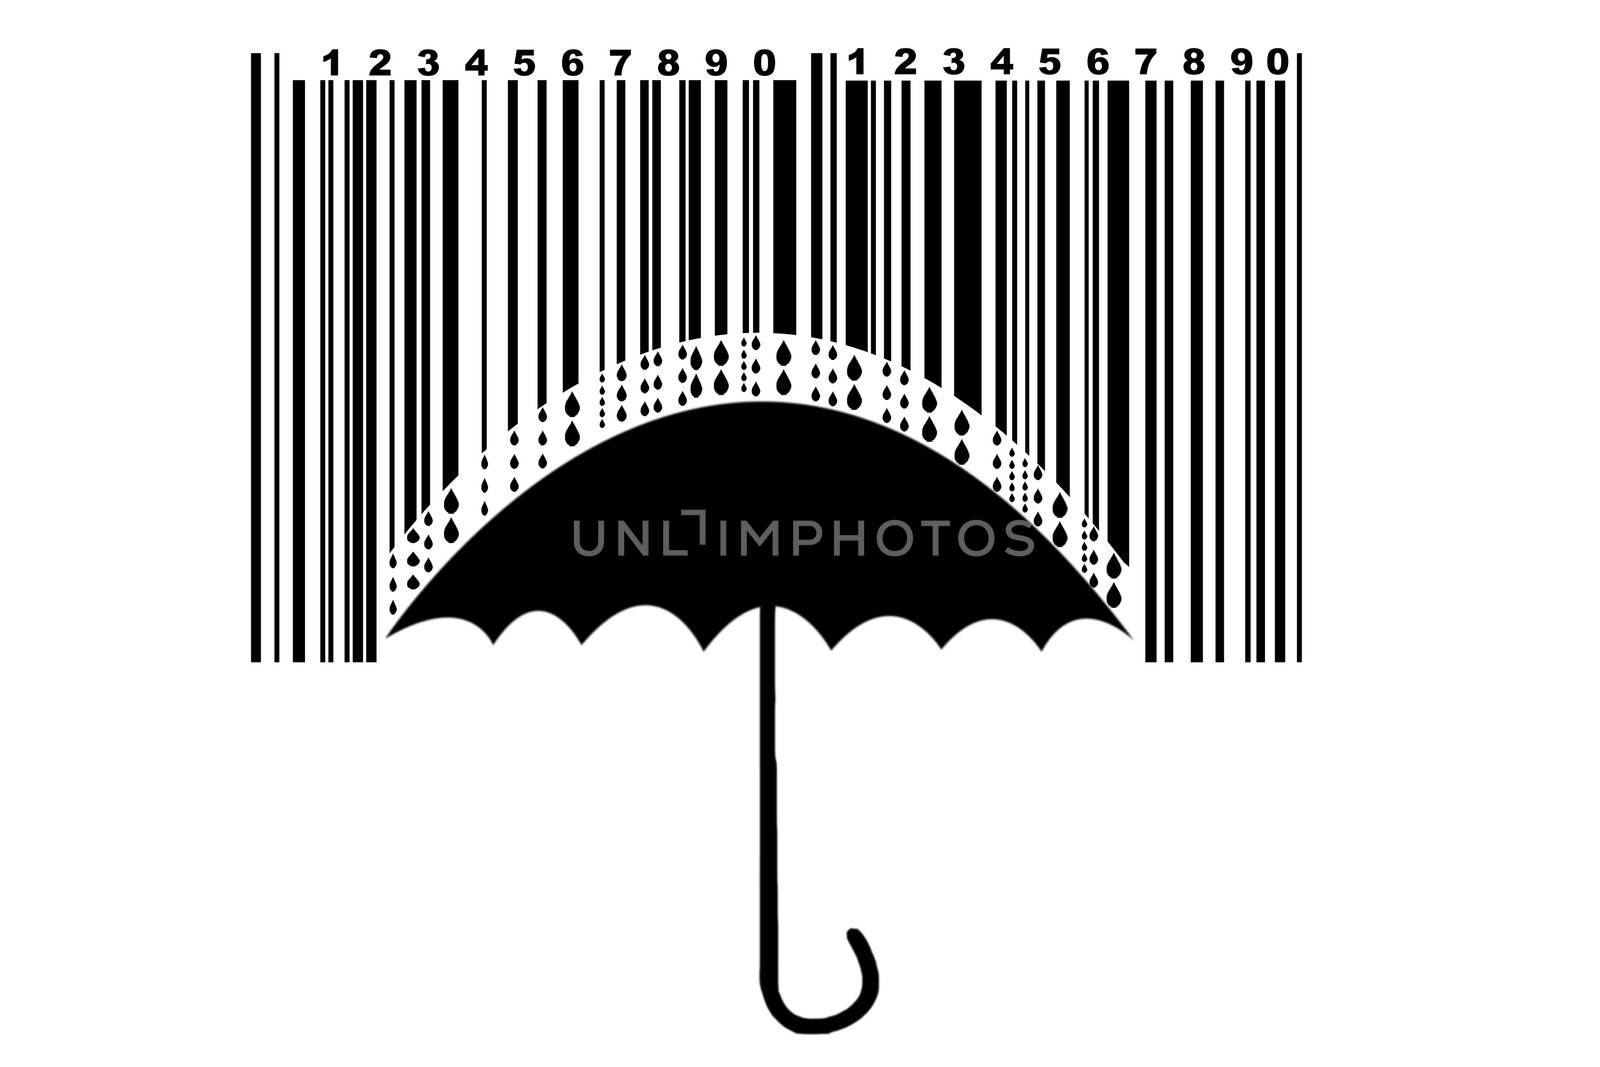 Umbrella and barcode, protection for high price